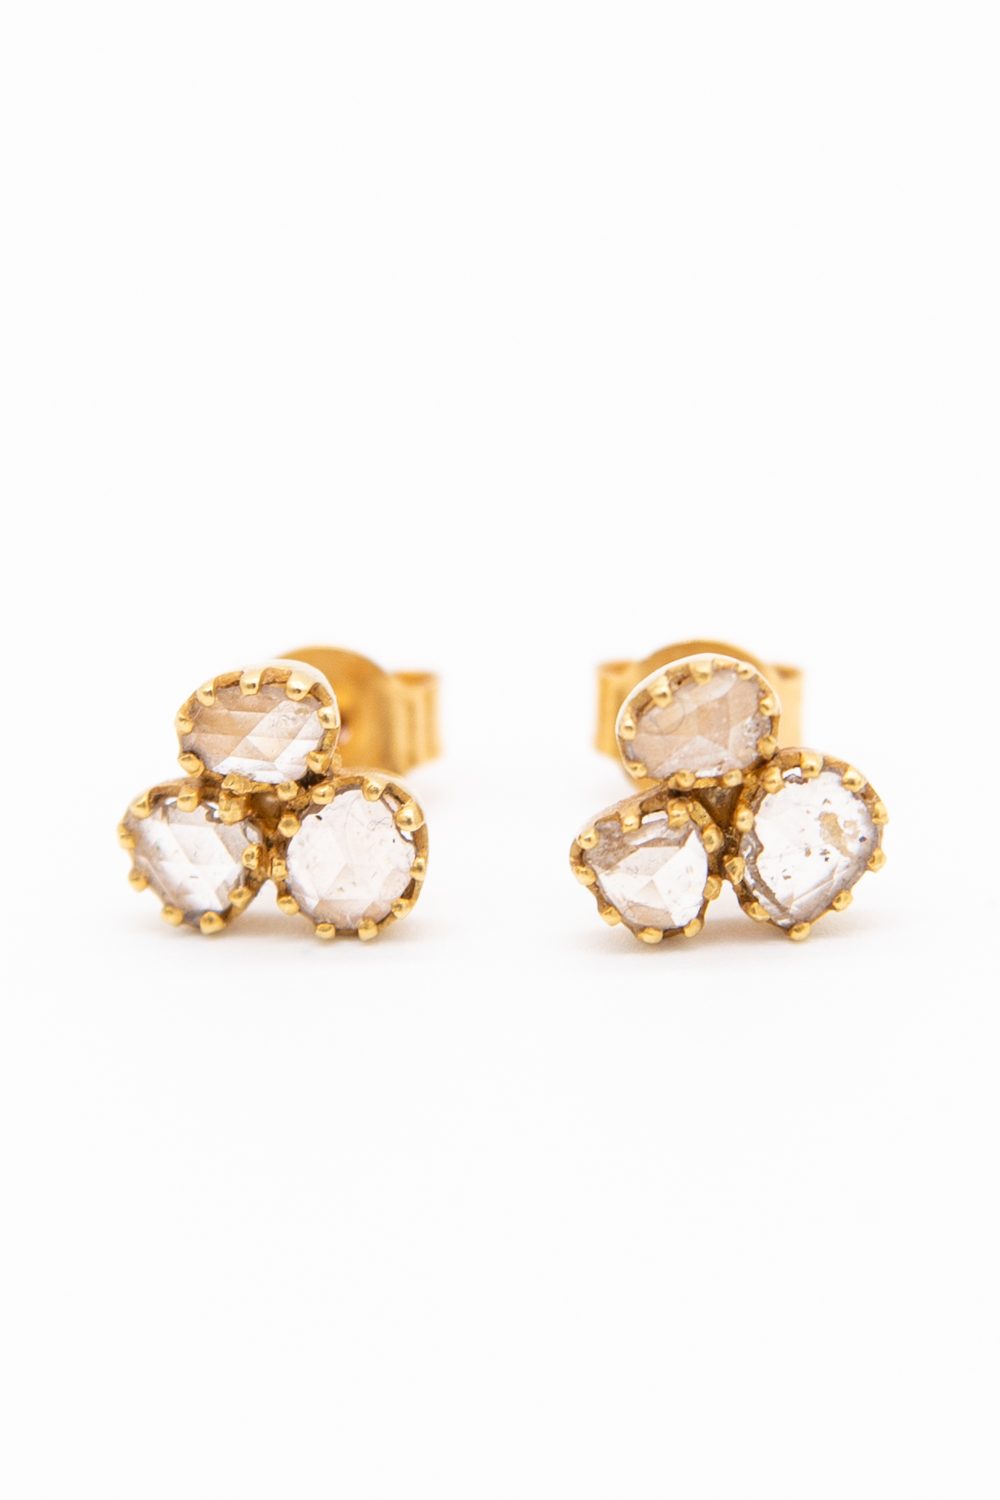 Pippa Small Ohrstecker "Diamond Dot Cluster Studs" in Gelbgold